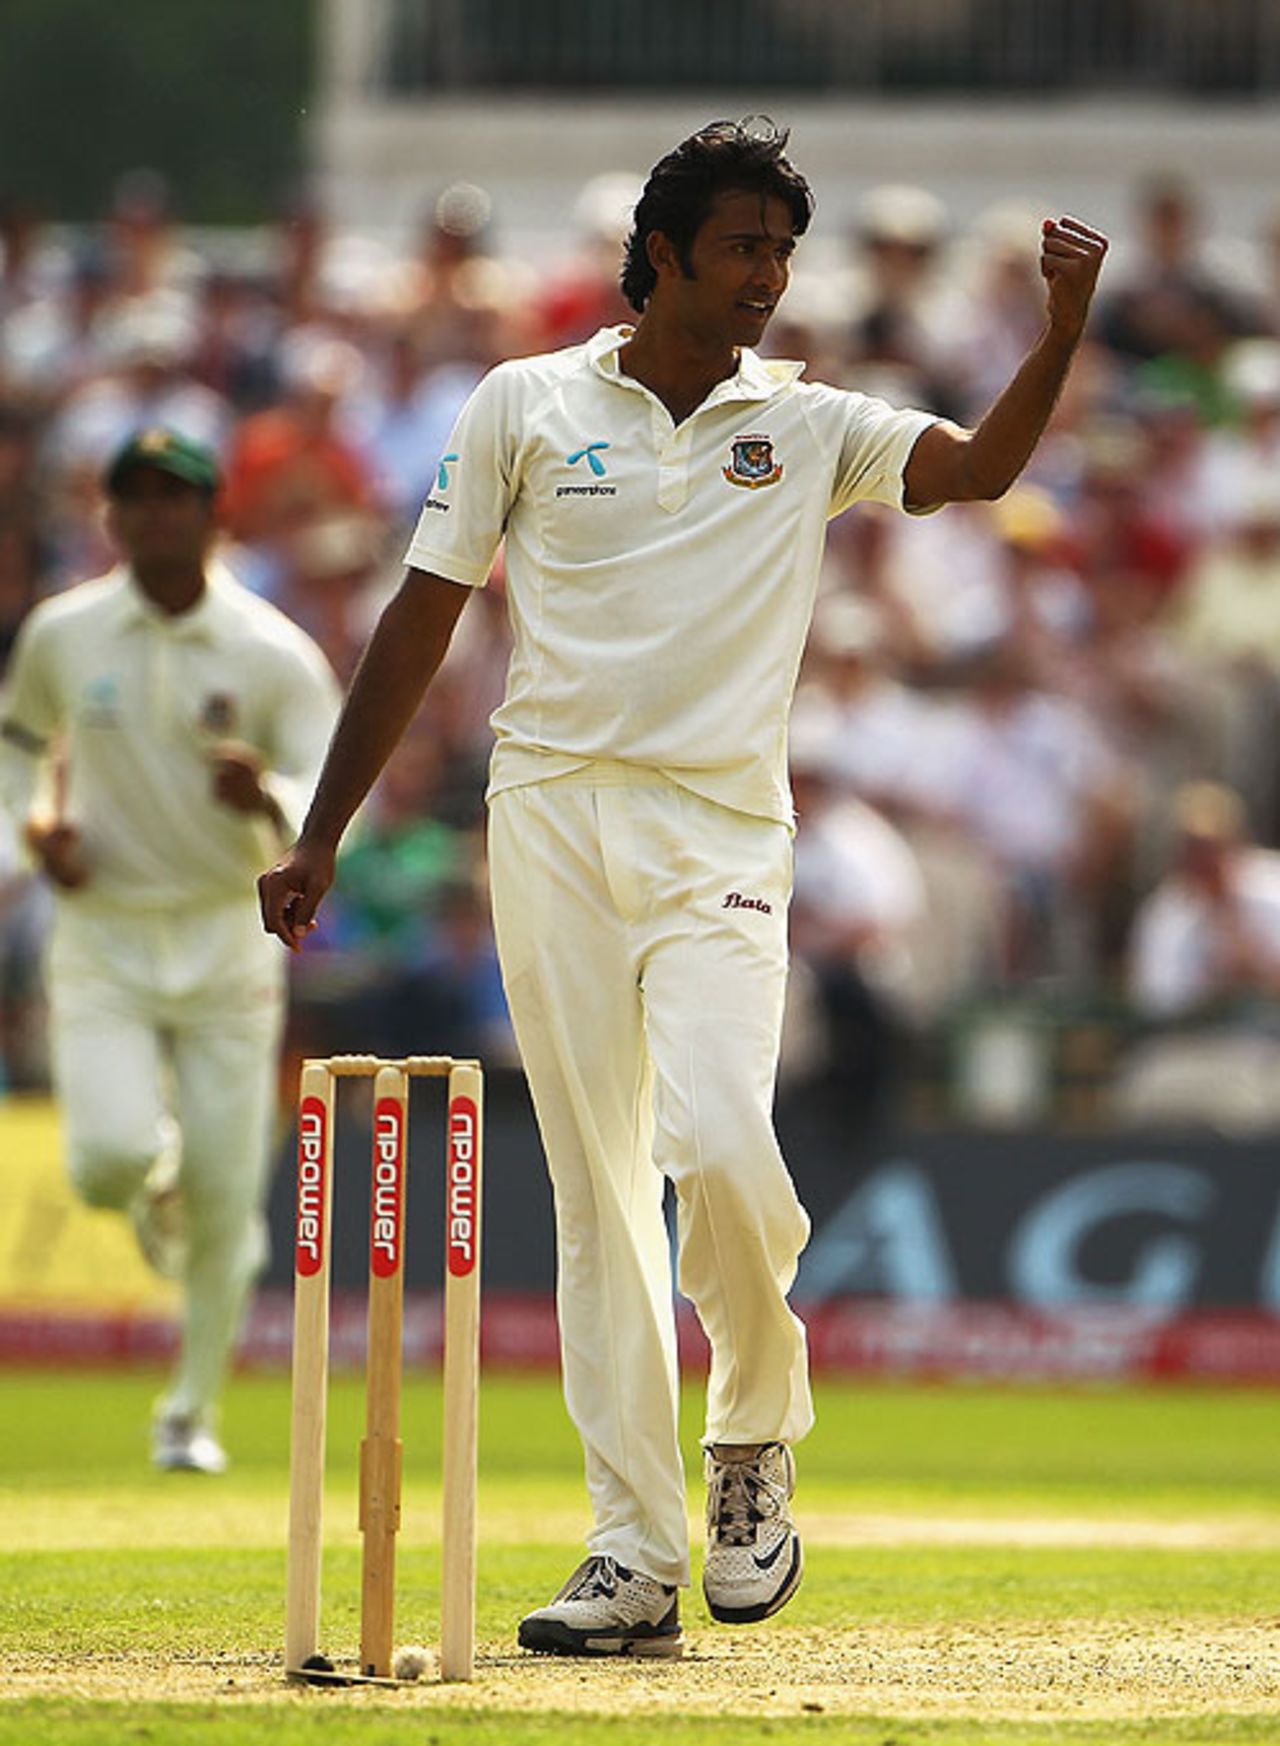 Shahadat Hossain celebrates the wicket of Eoin Morgan for 37, England v Bangladesh, 2nd Test, Old Trafford, June 4, 2010